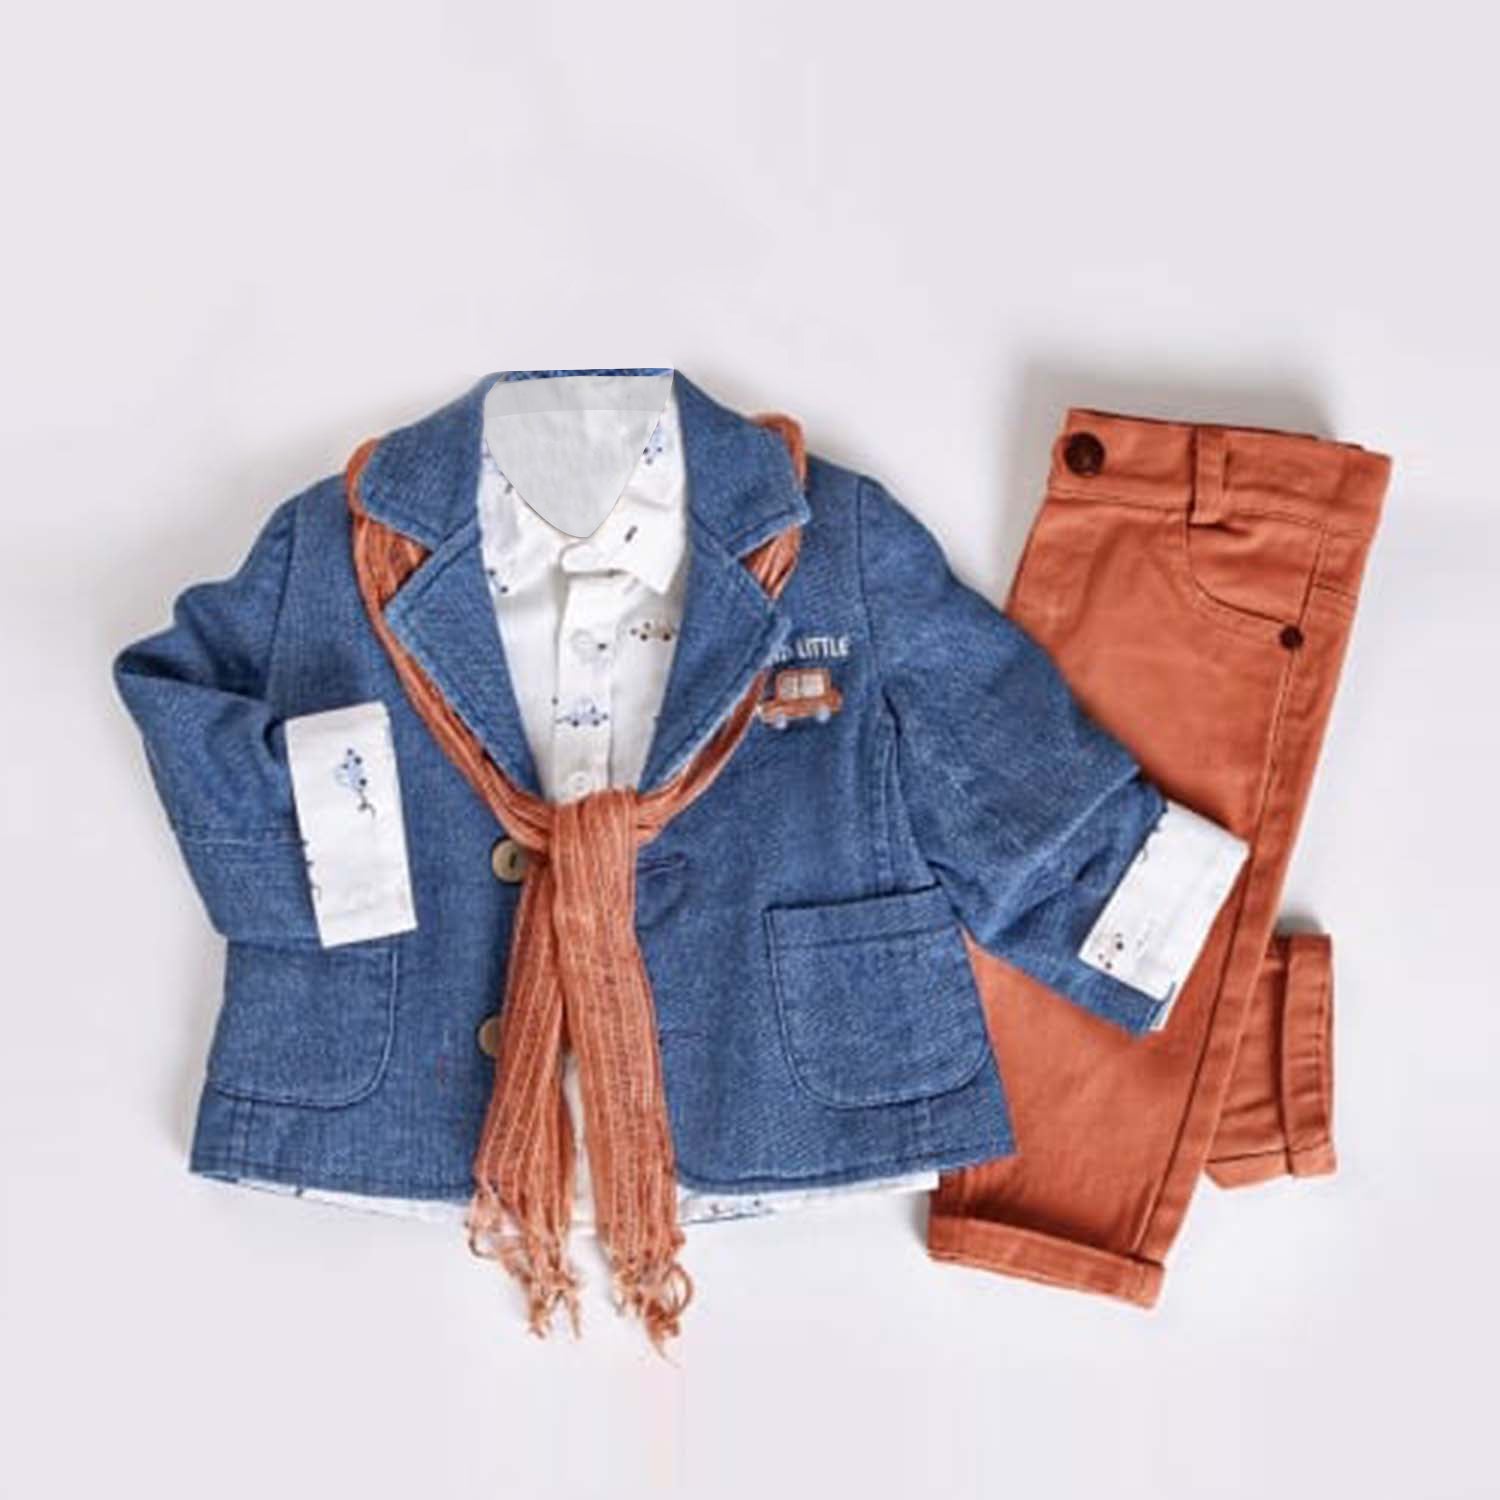 Infant and Toddler Girls' Adorable Blue Jean Jacket, Button-Up Shirt and Pants 3-Piece Set - 0